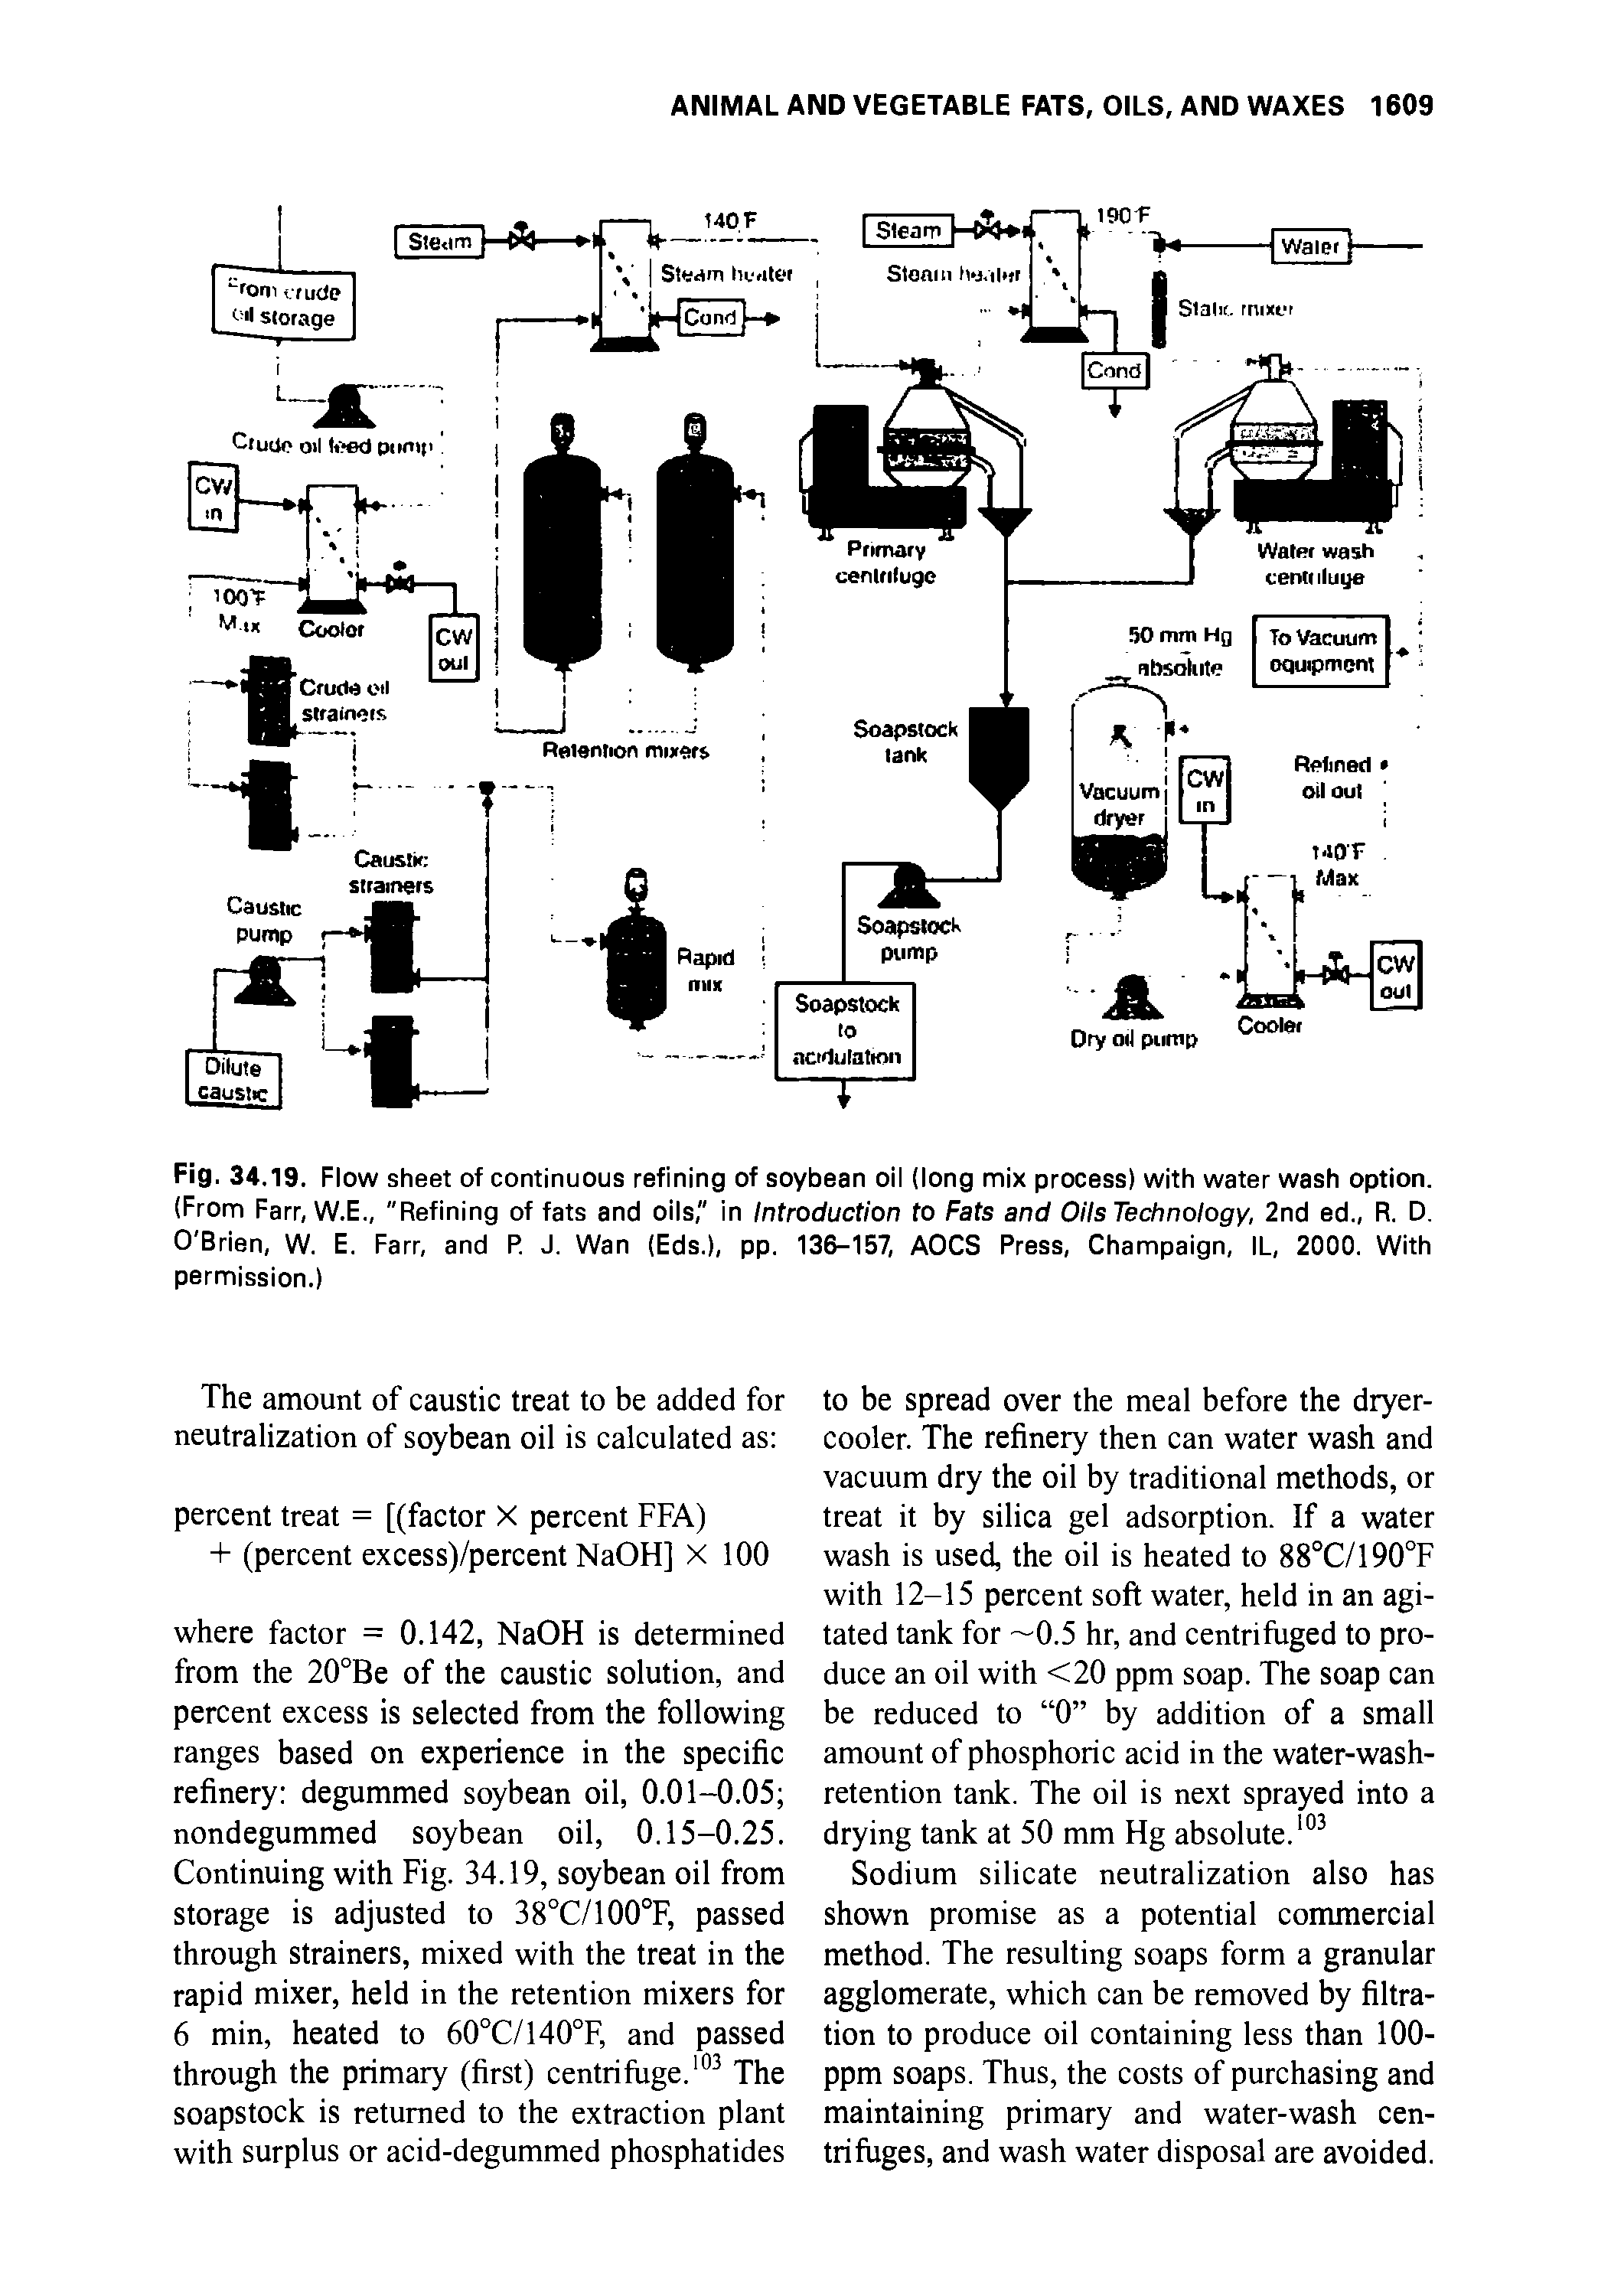 Fig. 34.19. Flow sheet of continuous refining of soybean oil (long mix process) with water wash option. (From Farr, W.E., "Refining of fats and oils," in Introduction to Fats and Oils Technology, 2nd ed R. D. O Brien, W. E. Farr, and P. J. Wan (Eds.), pp. 136-157, AOCS Press, Champaign, IL, 2000. With permission.)...